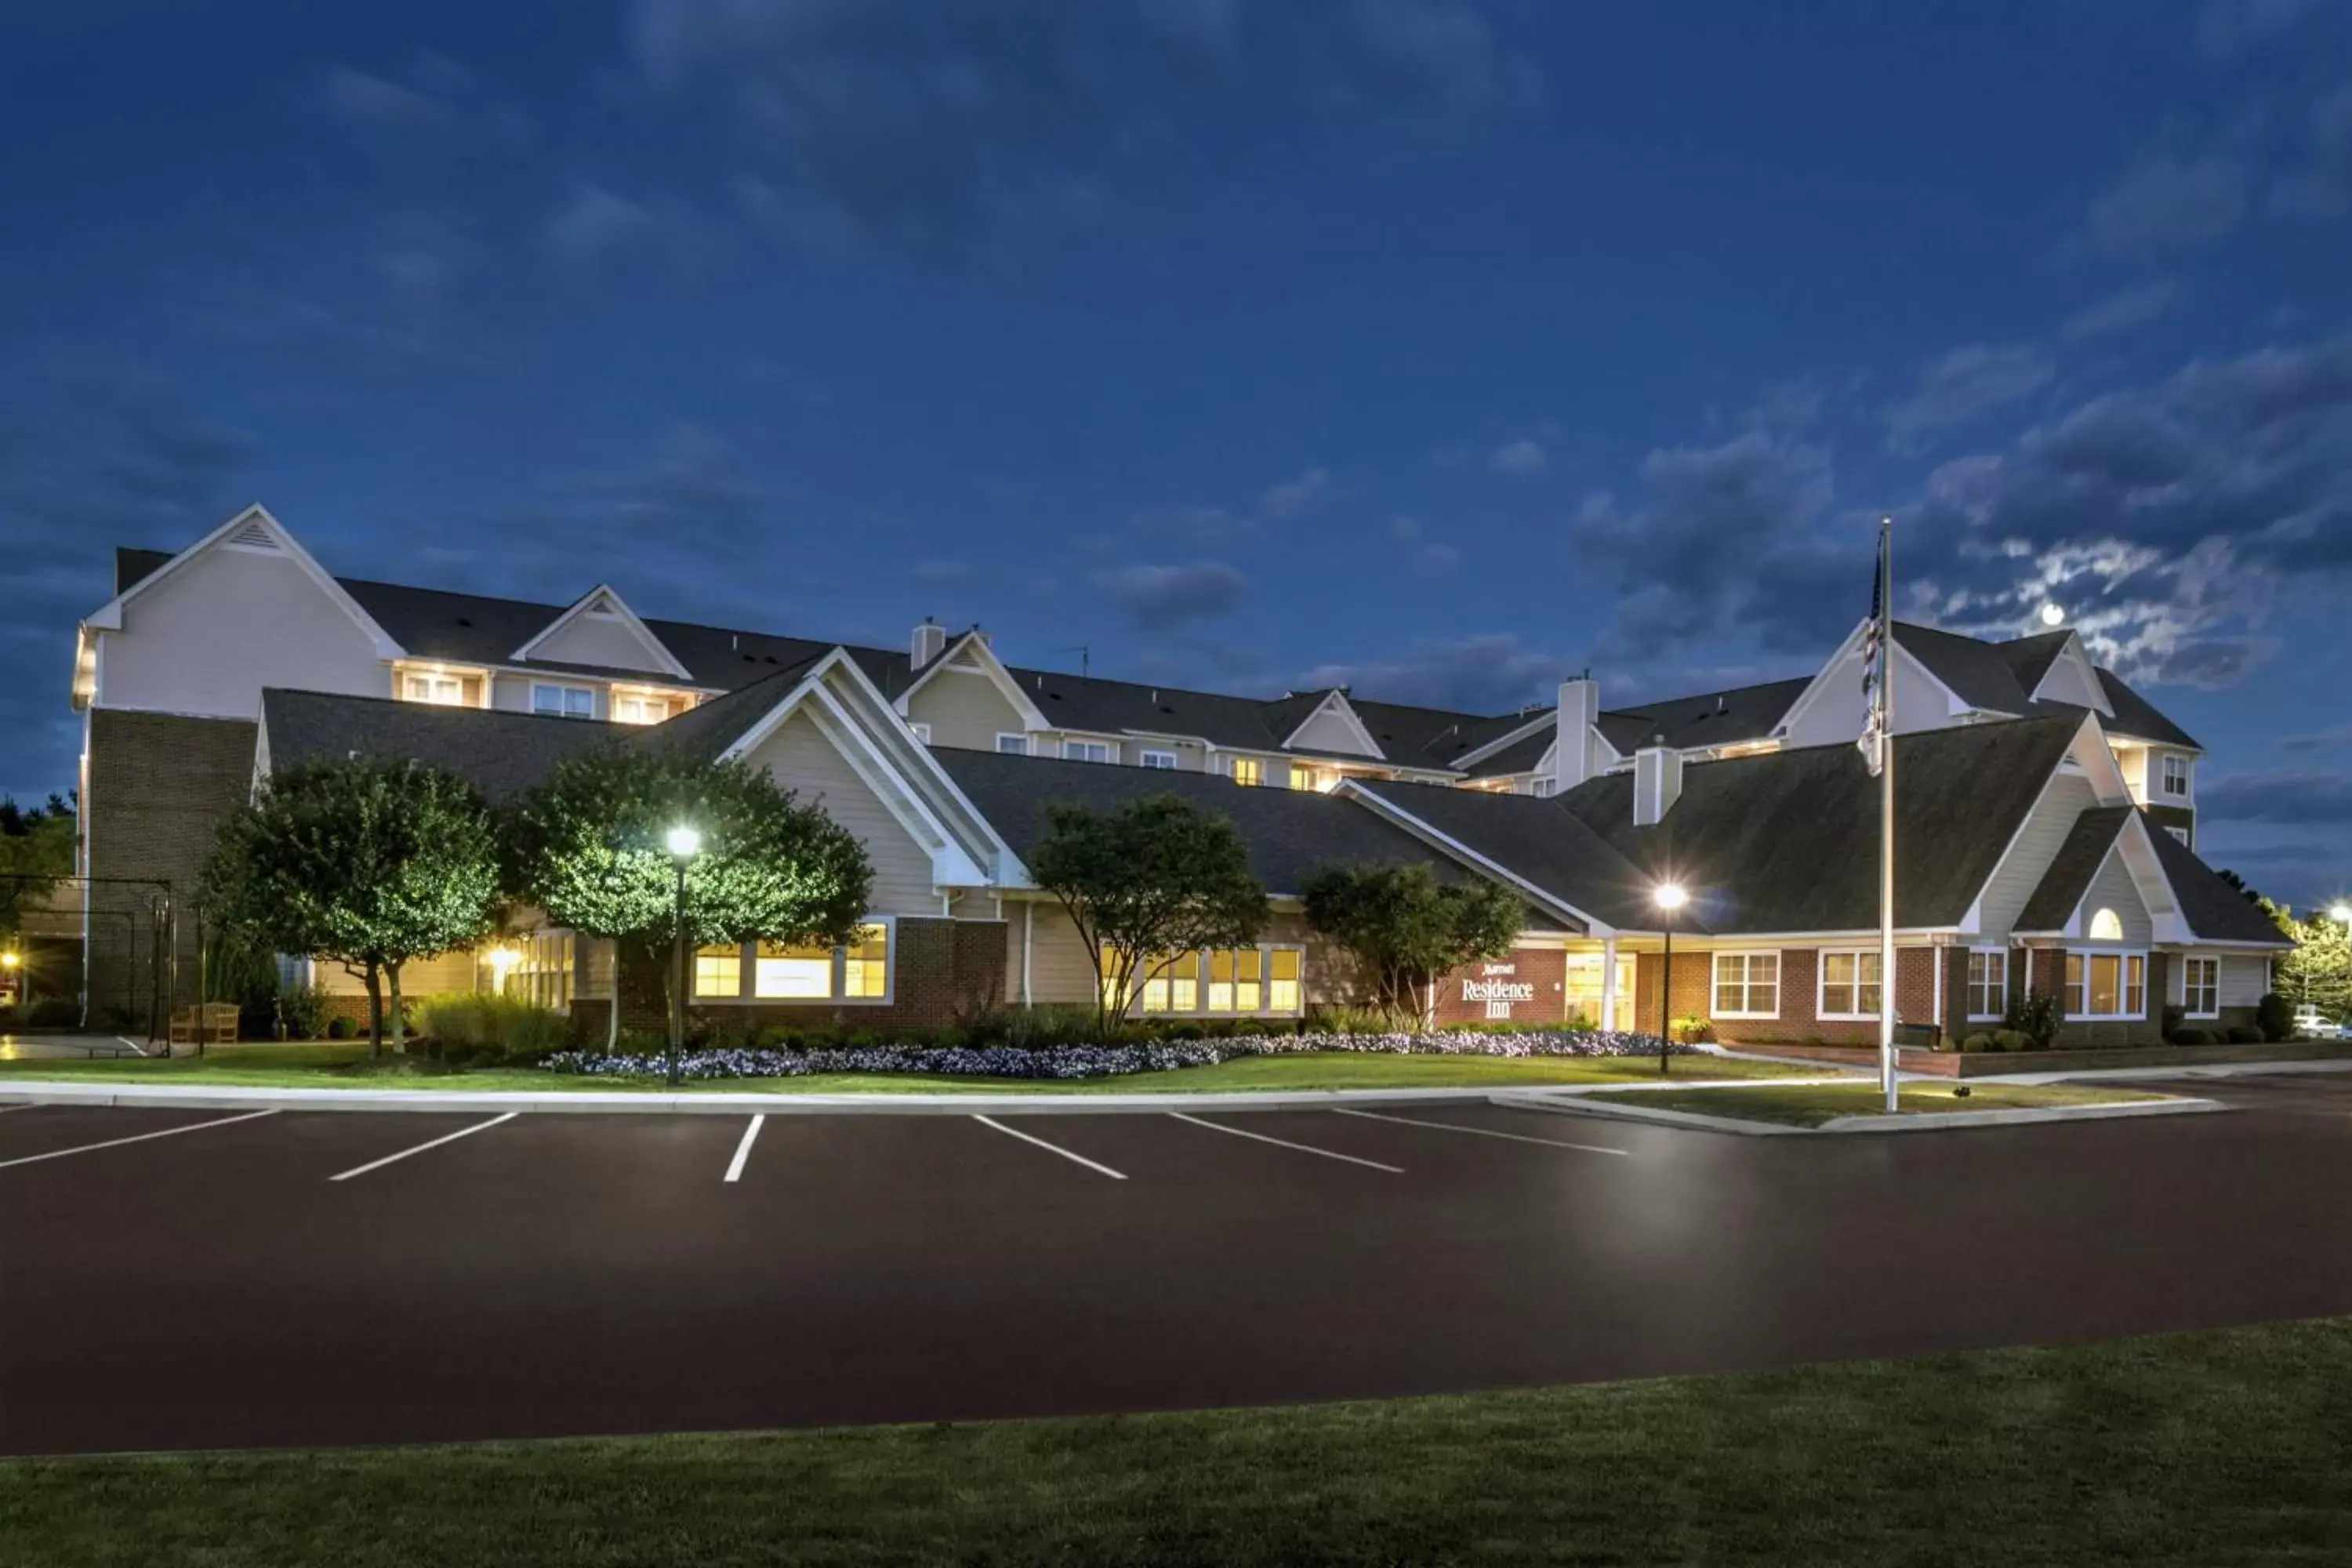 Property Building in Residence Inn Pittsburgh Cranberry Township